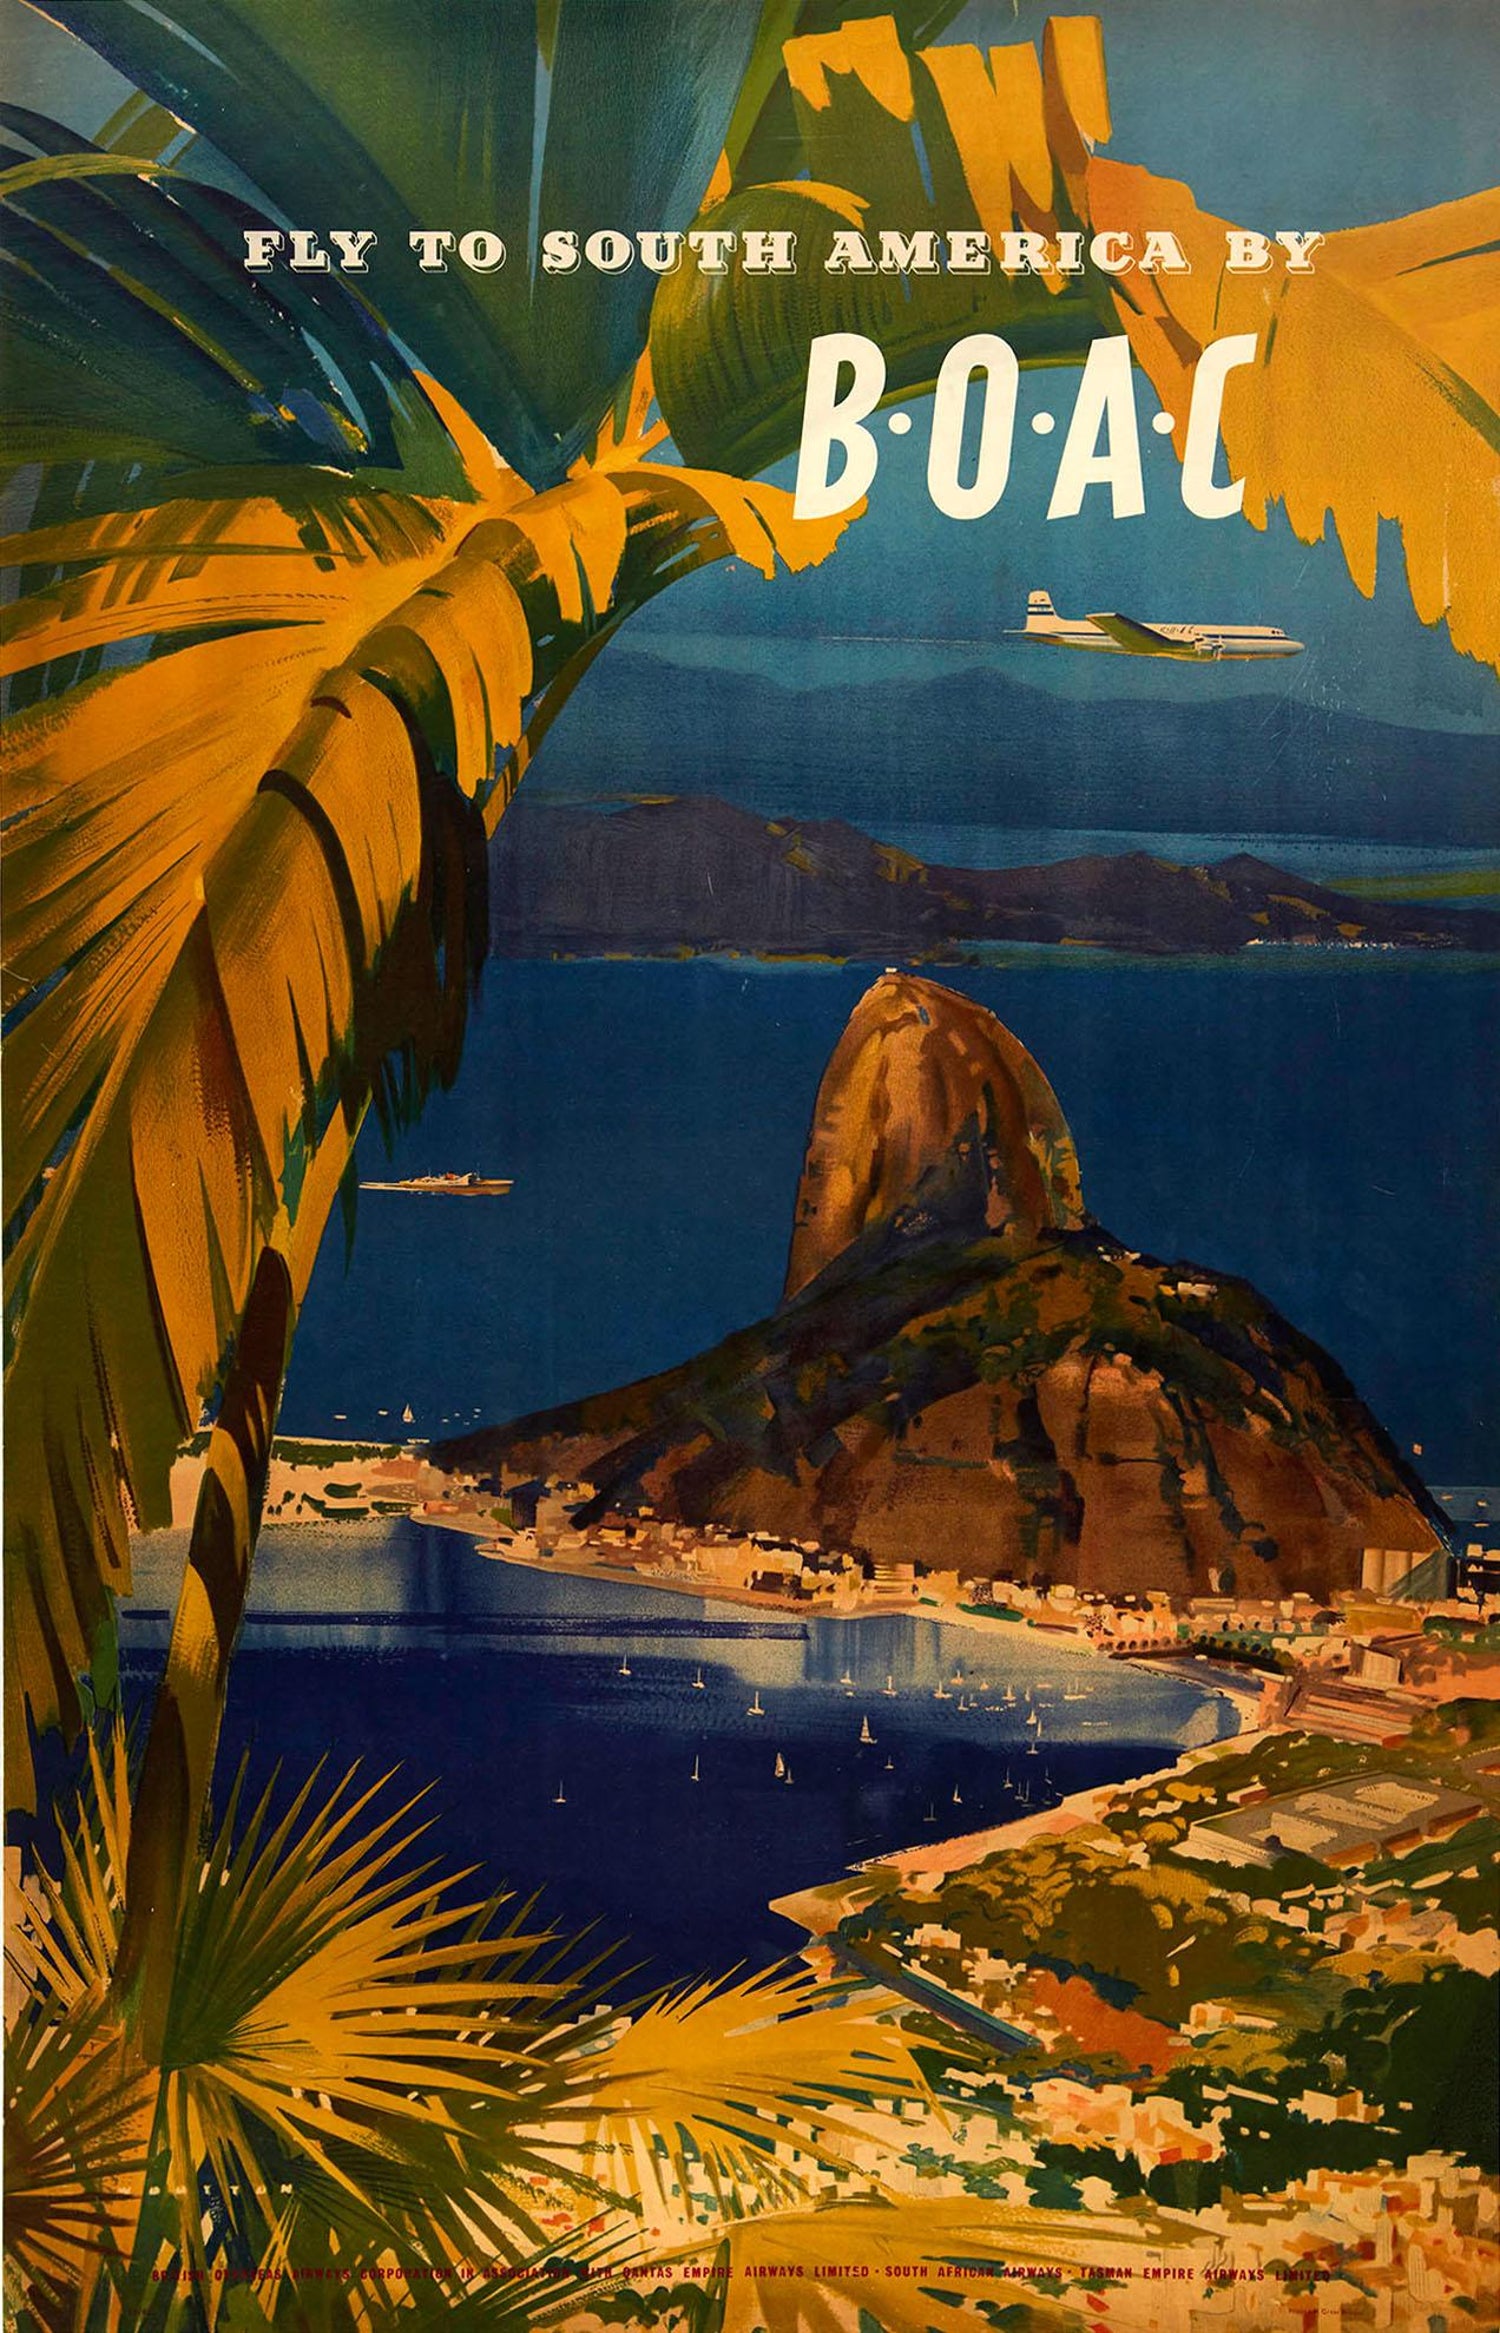 Vintage BOAC East Africa Airline Travel Poster Frank Wootton 1950 Fine Art Print